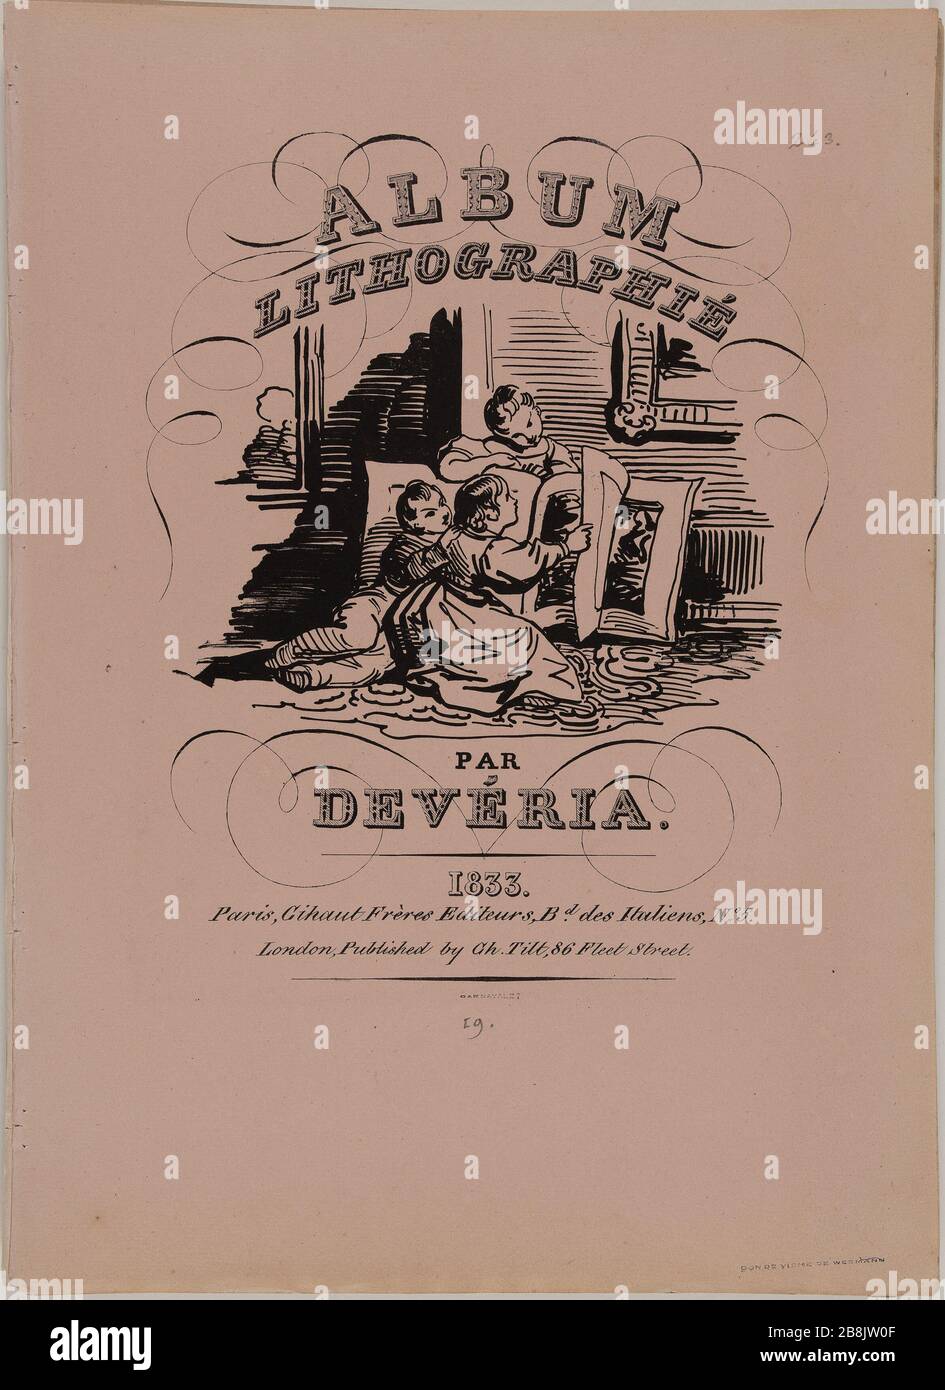 Album lithographed by Deveria, in Gihaut in Paris and in London Tilt, 1833.  Three children flipping through a book cover page Achille Deveria  (1800-1857), Gihaut frères et Charles Tilt. Album lithographié. Trois